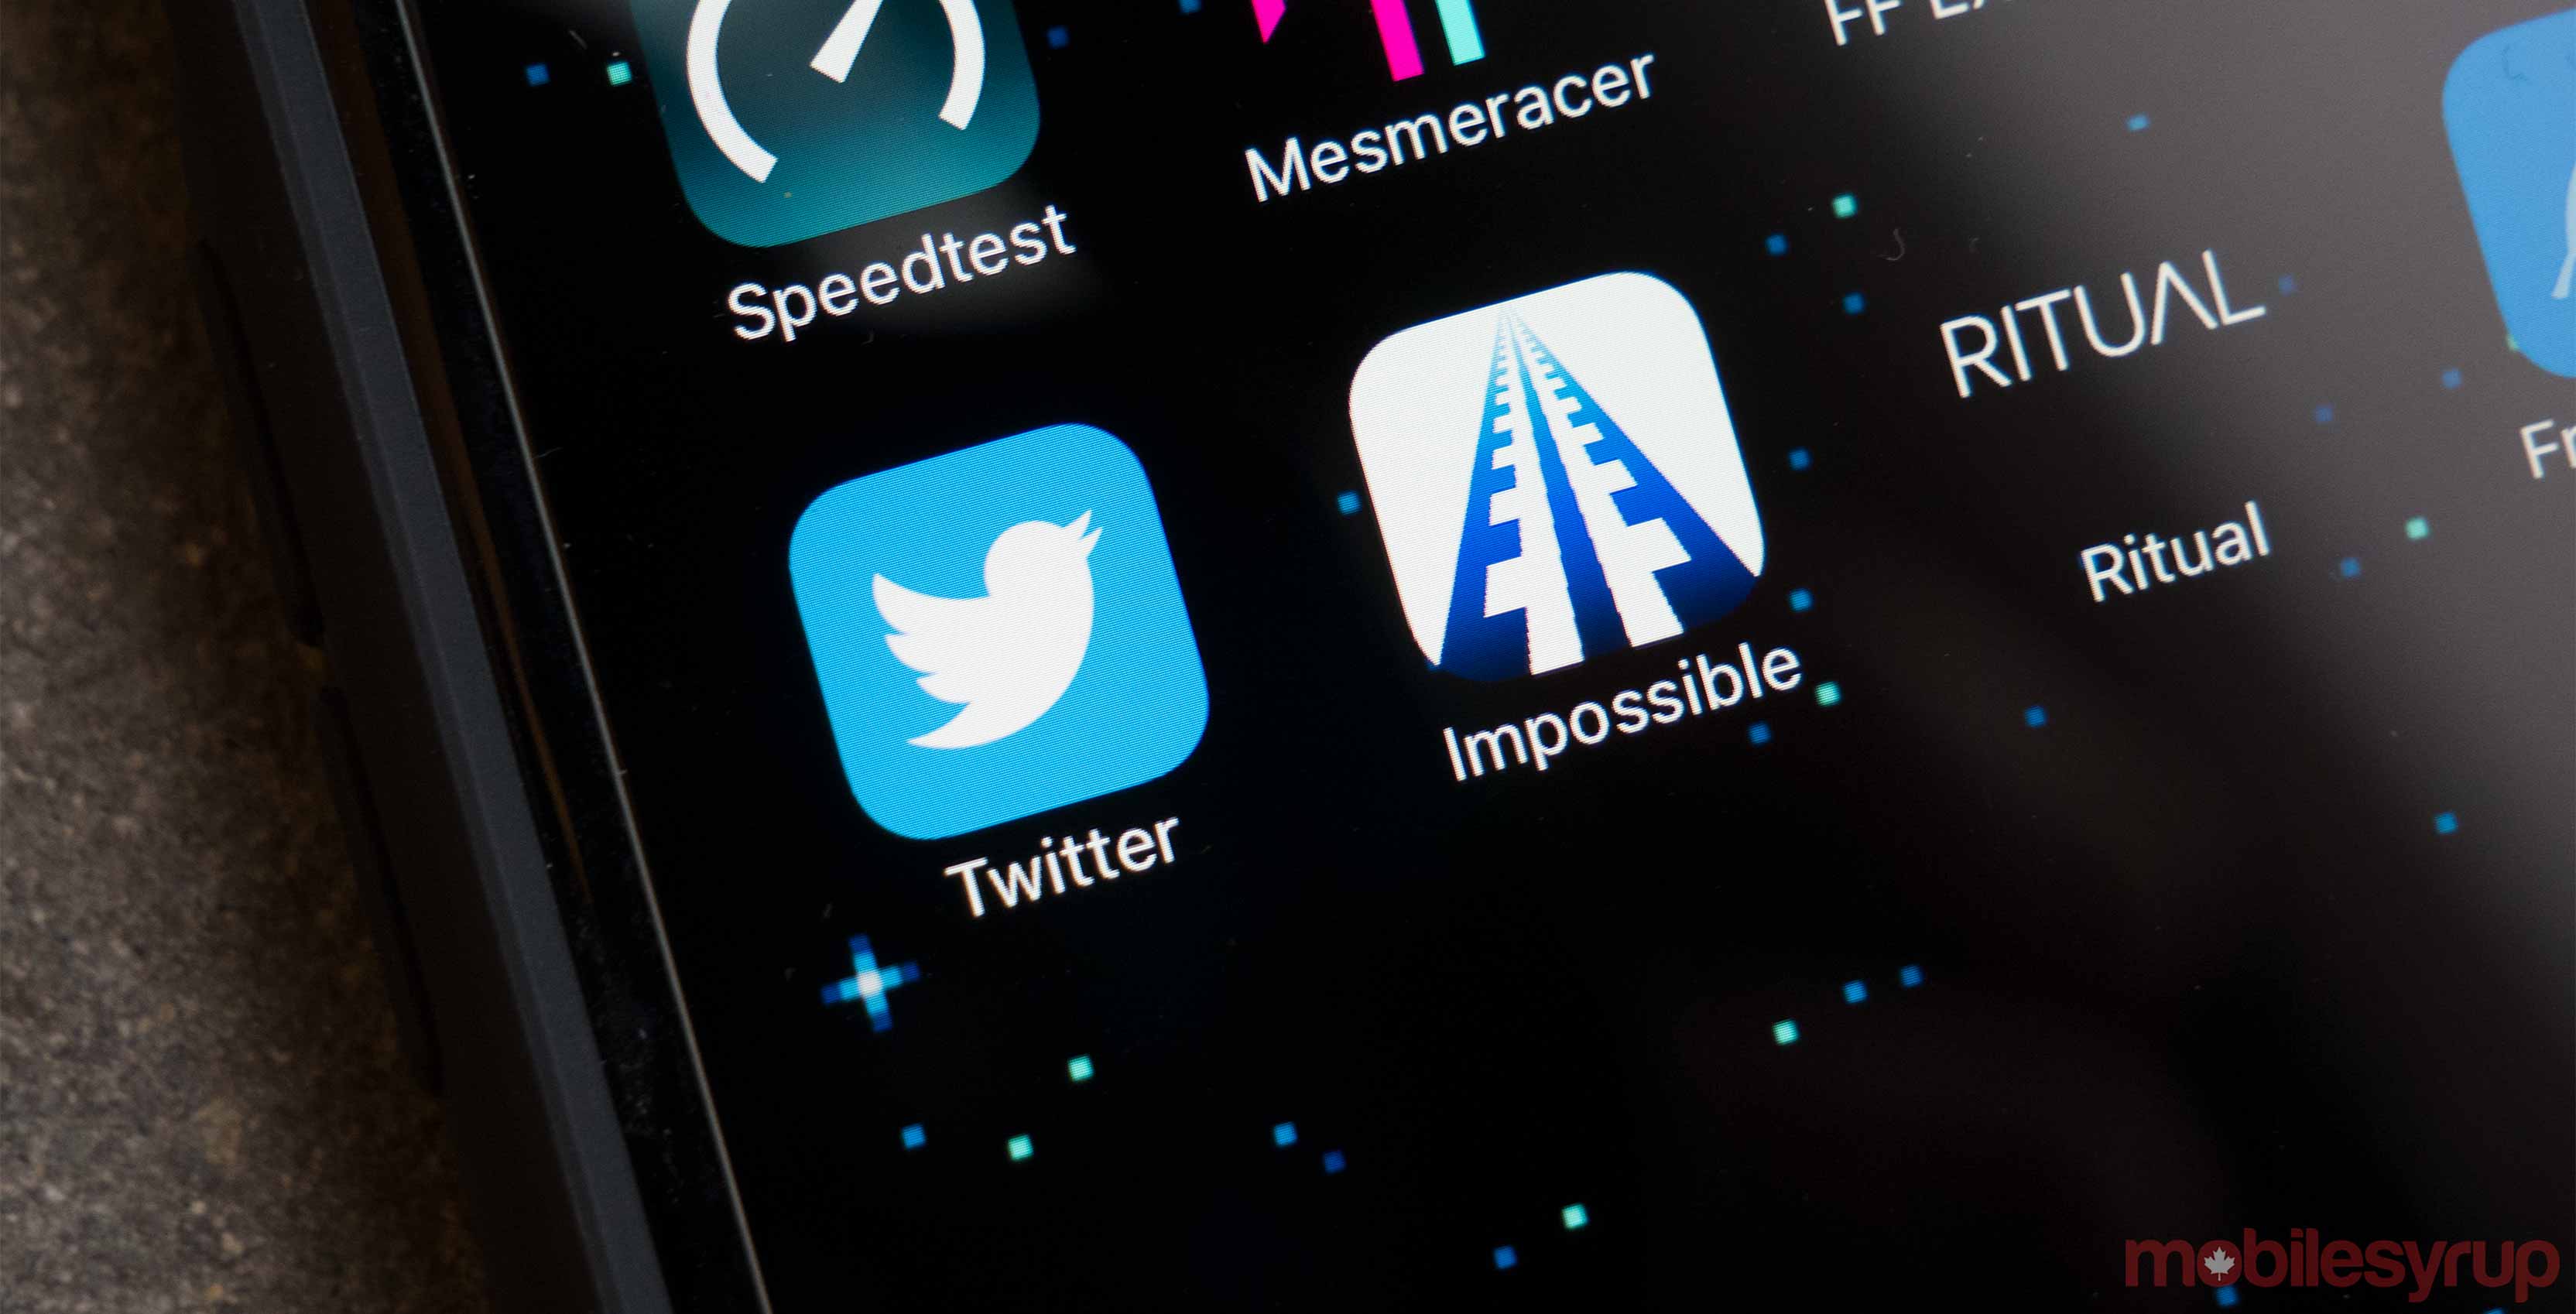 Twitter app on a phone - Twitter details new safety features that aim stop trolls harassment abuse